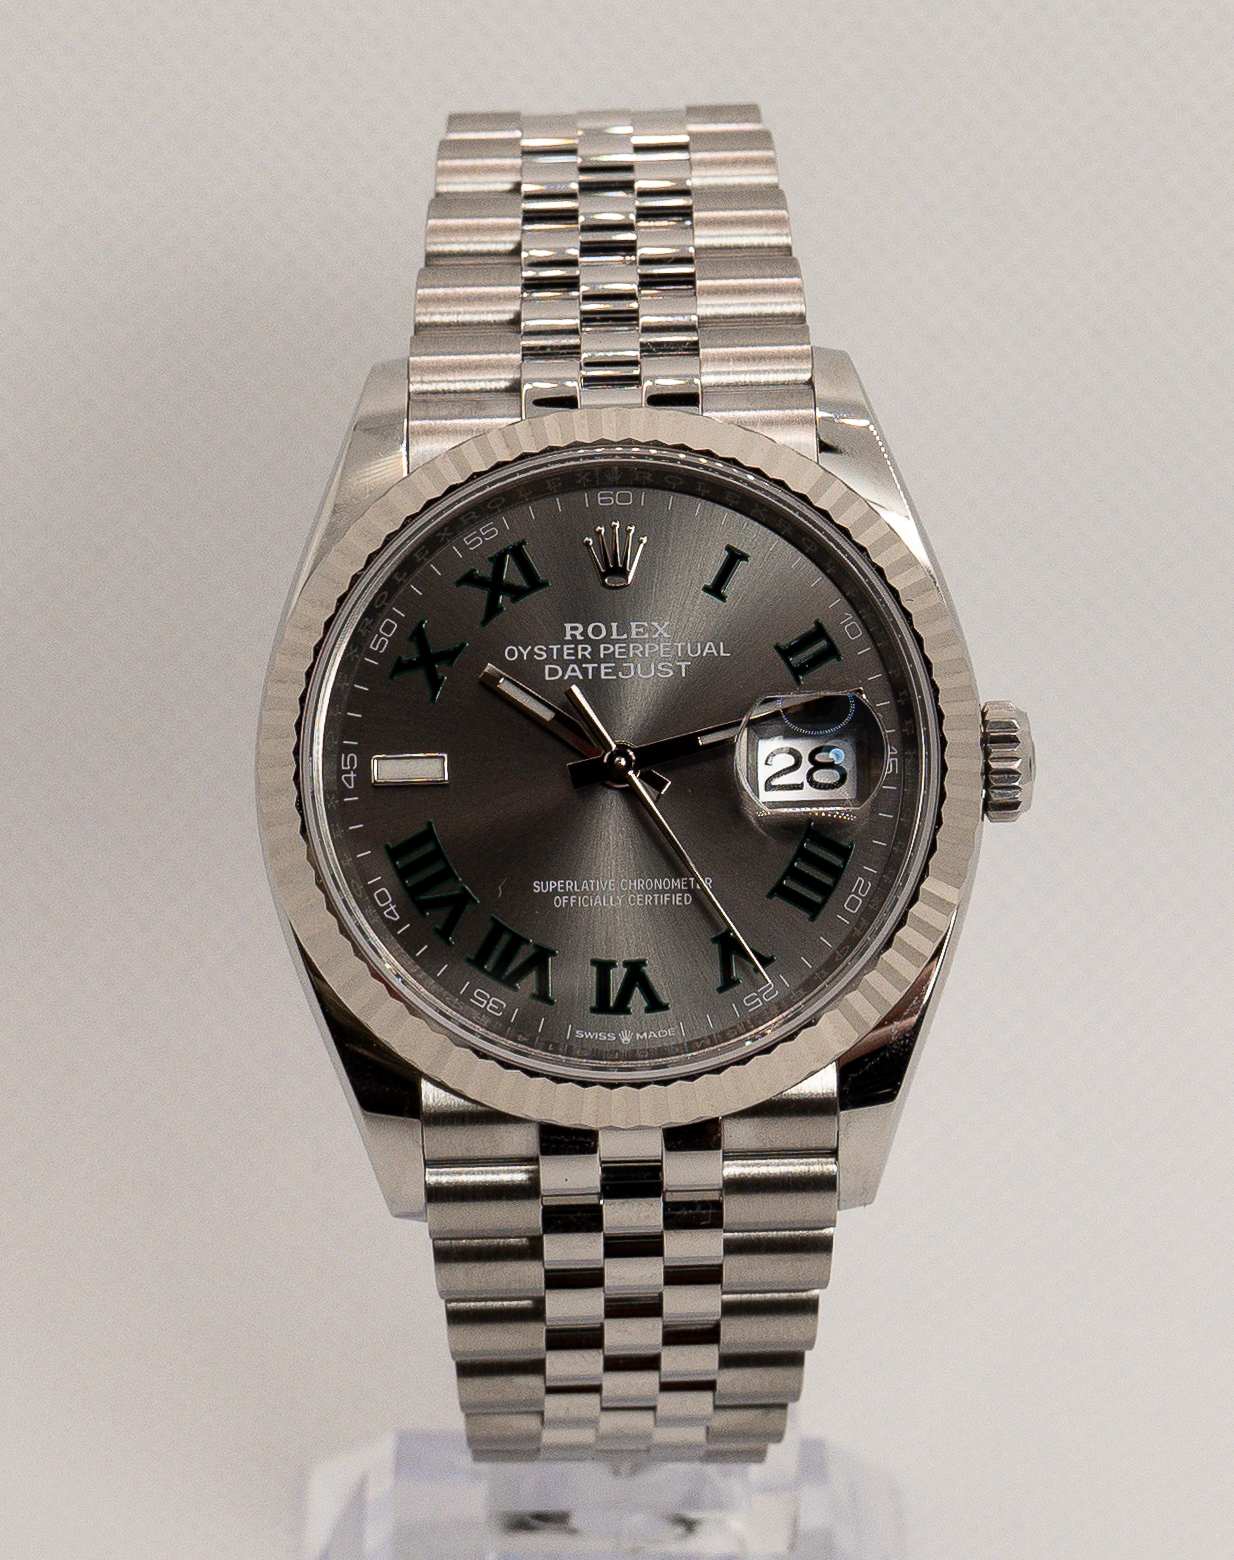 The Rolex Datejust 36 with Wimbledon Dial